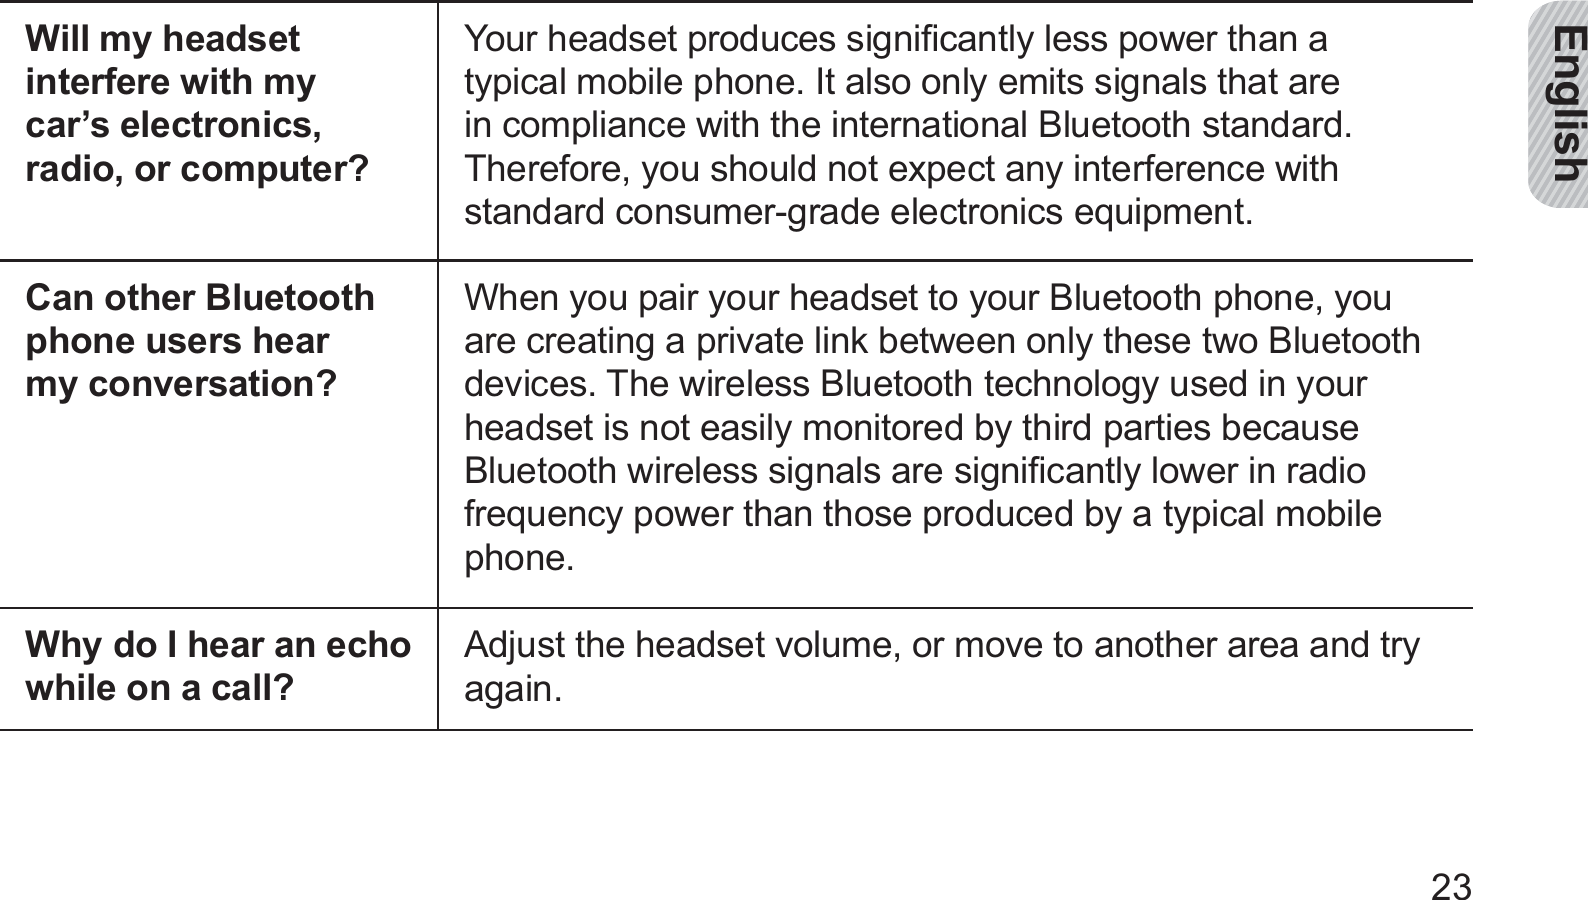 English23Will my headset interfere with my  car’s electronics, radio, or computer?Your headset produces signiﬁcantly less power than a typical mobile phone. It also only emits signals that are in compliance with the international Bluetooth standard. Therefore, you should not expect any interference with standard consumer-grade electronics equipment.Can other Bluetooth phone users hear my conversation?When you pair your headset to your Bluetooth phone, you are creating a private link between only these two Bluetooth devices. The wireless Bluetooth technology used in your headset is not easily monitored by third parties because Bluetooth wireless signals are signiﬁcantly lower in radio frequency power than those produced by a typical mobile phone.Why do I hear an echo while on a call?Adjust the headset volume, or move to another area and try again.